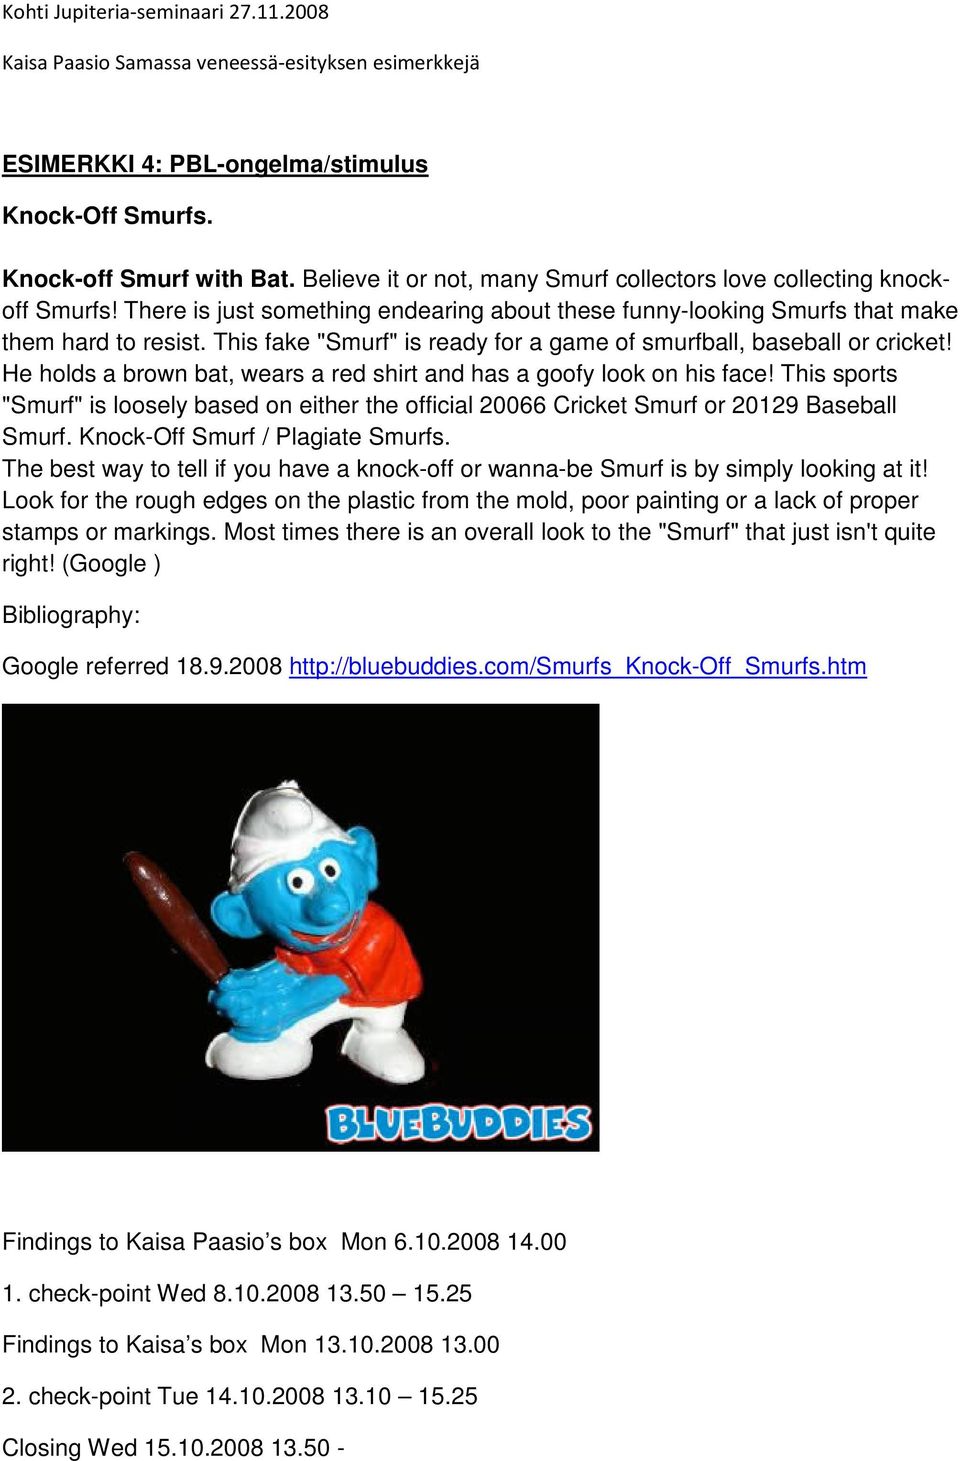 He holds a brown bat, wears a red shirt and has a goofy look on his face! This sports "Smurf" is loosely based on either the official 20066 Cricket Smurf or 20129 Baseball Smurf.